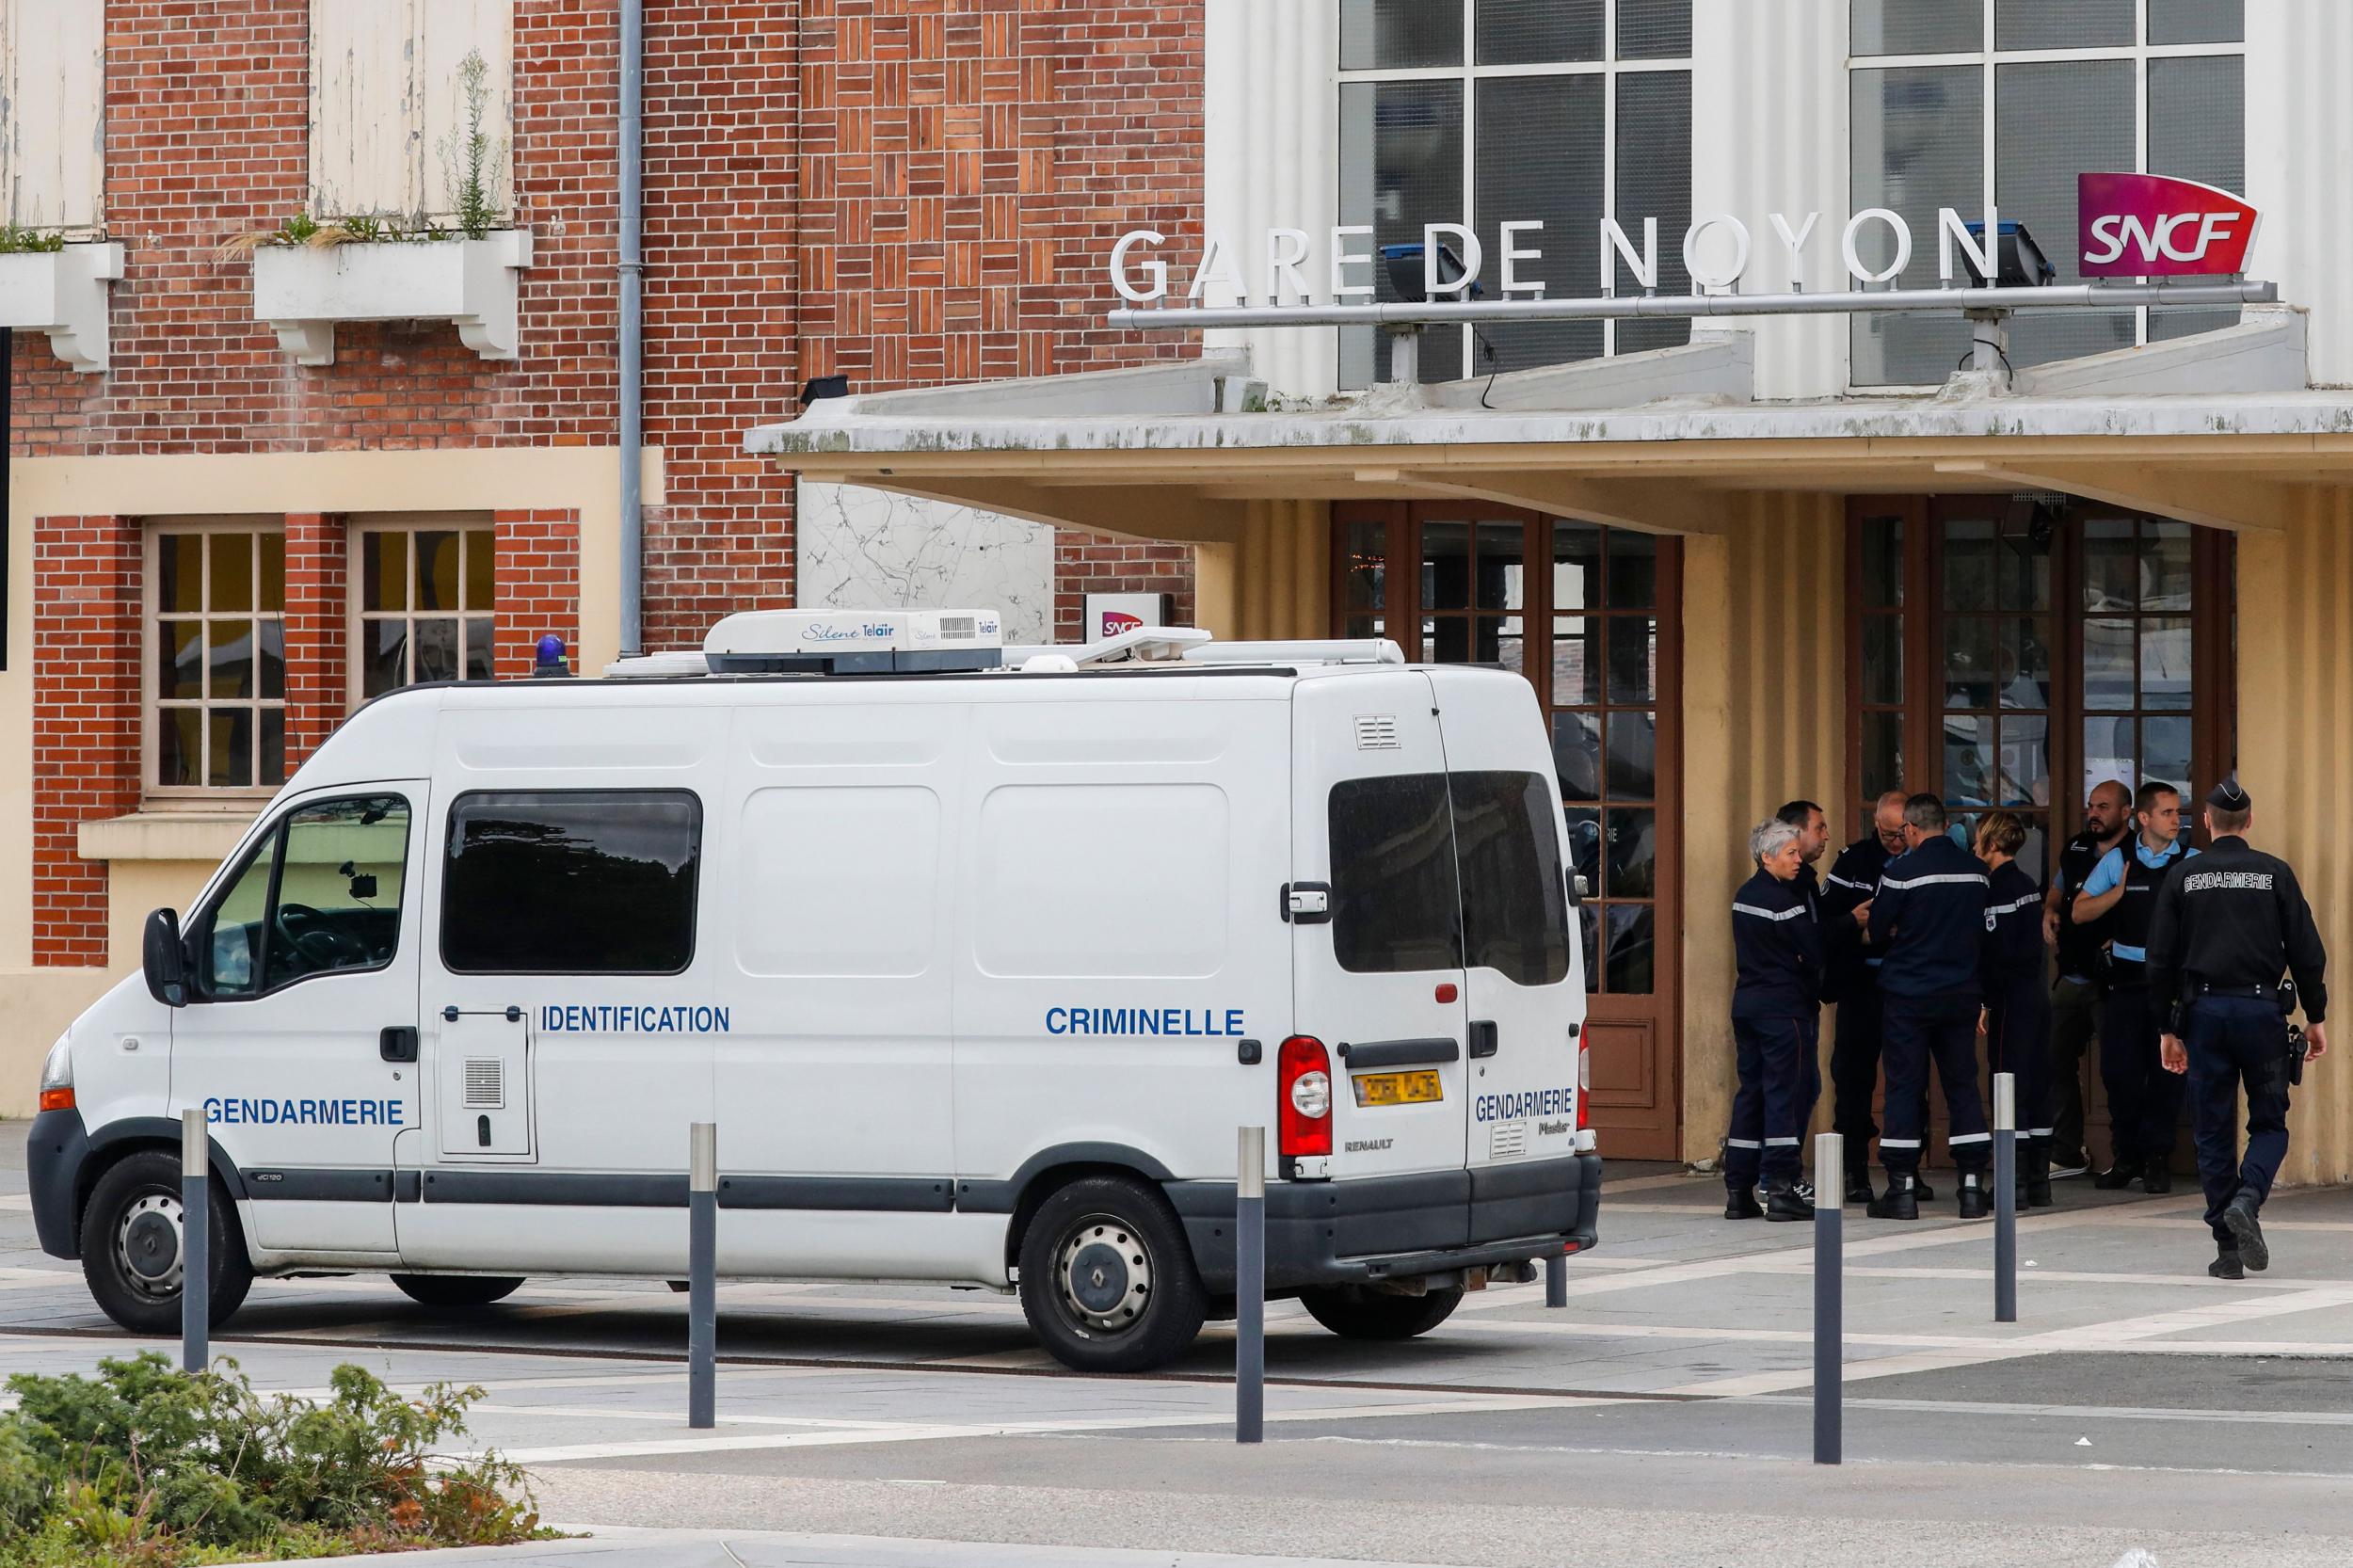 Gendarmes gather by a forensic police van outside the railway sation in Noyon, northeast of Paris FRANCOIS GUILLOT/AFP/Getty Images